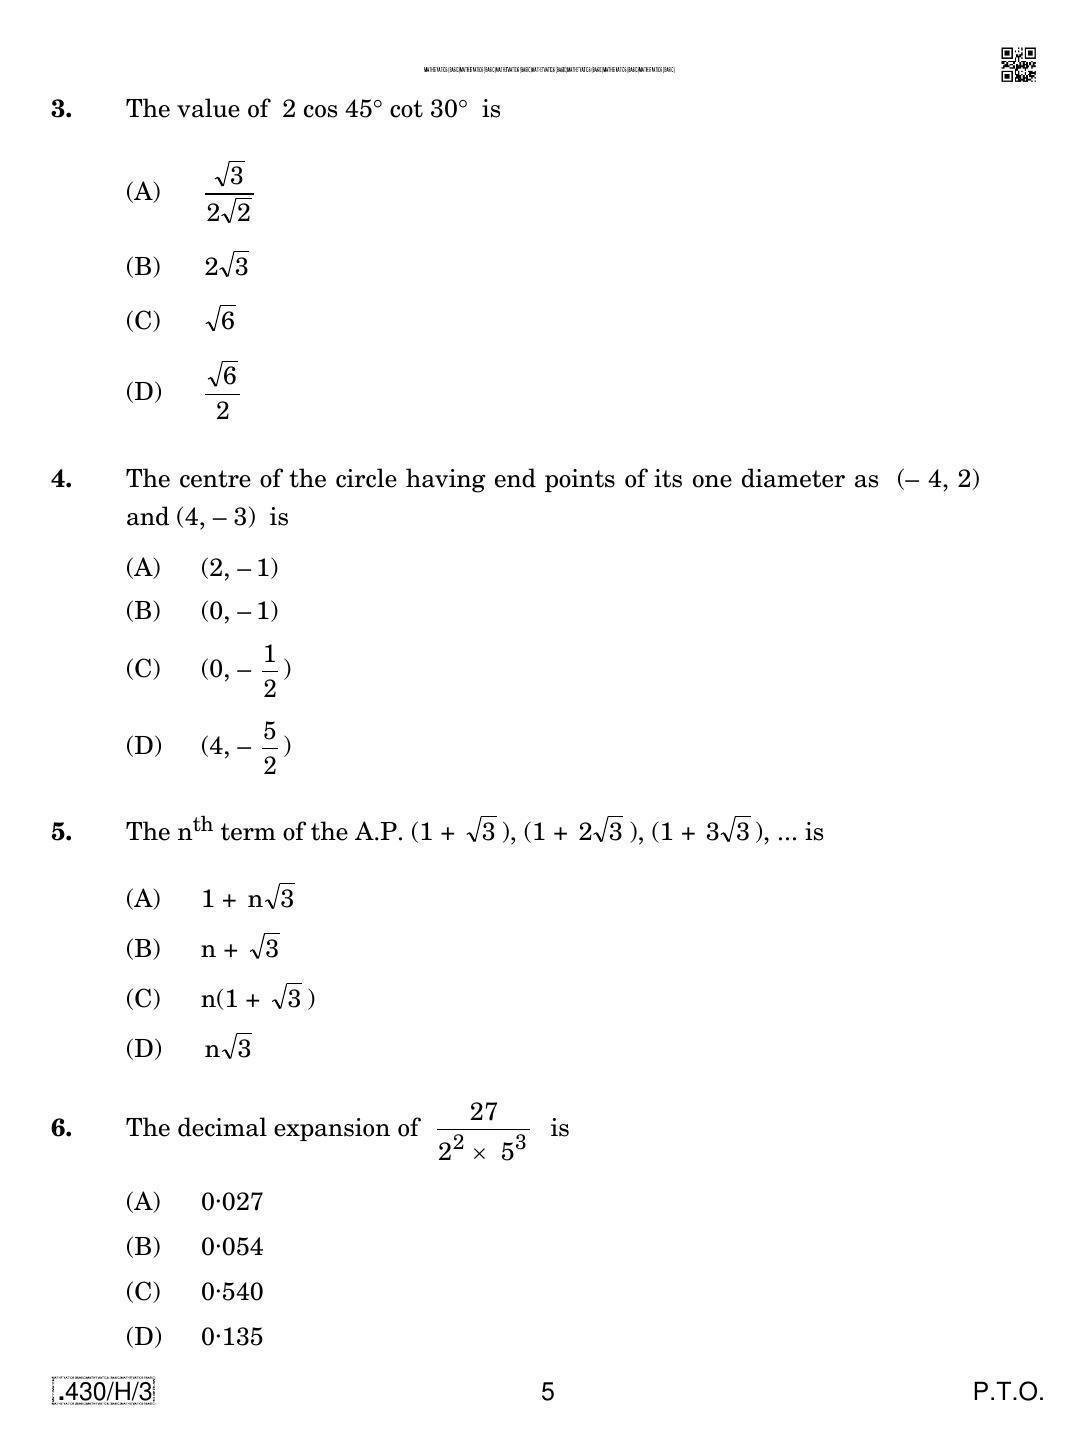 CBSE Class 10 430-C-3 - Maths (Basic) 2020 Compartment Question Paper - Page 5